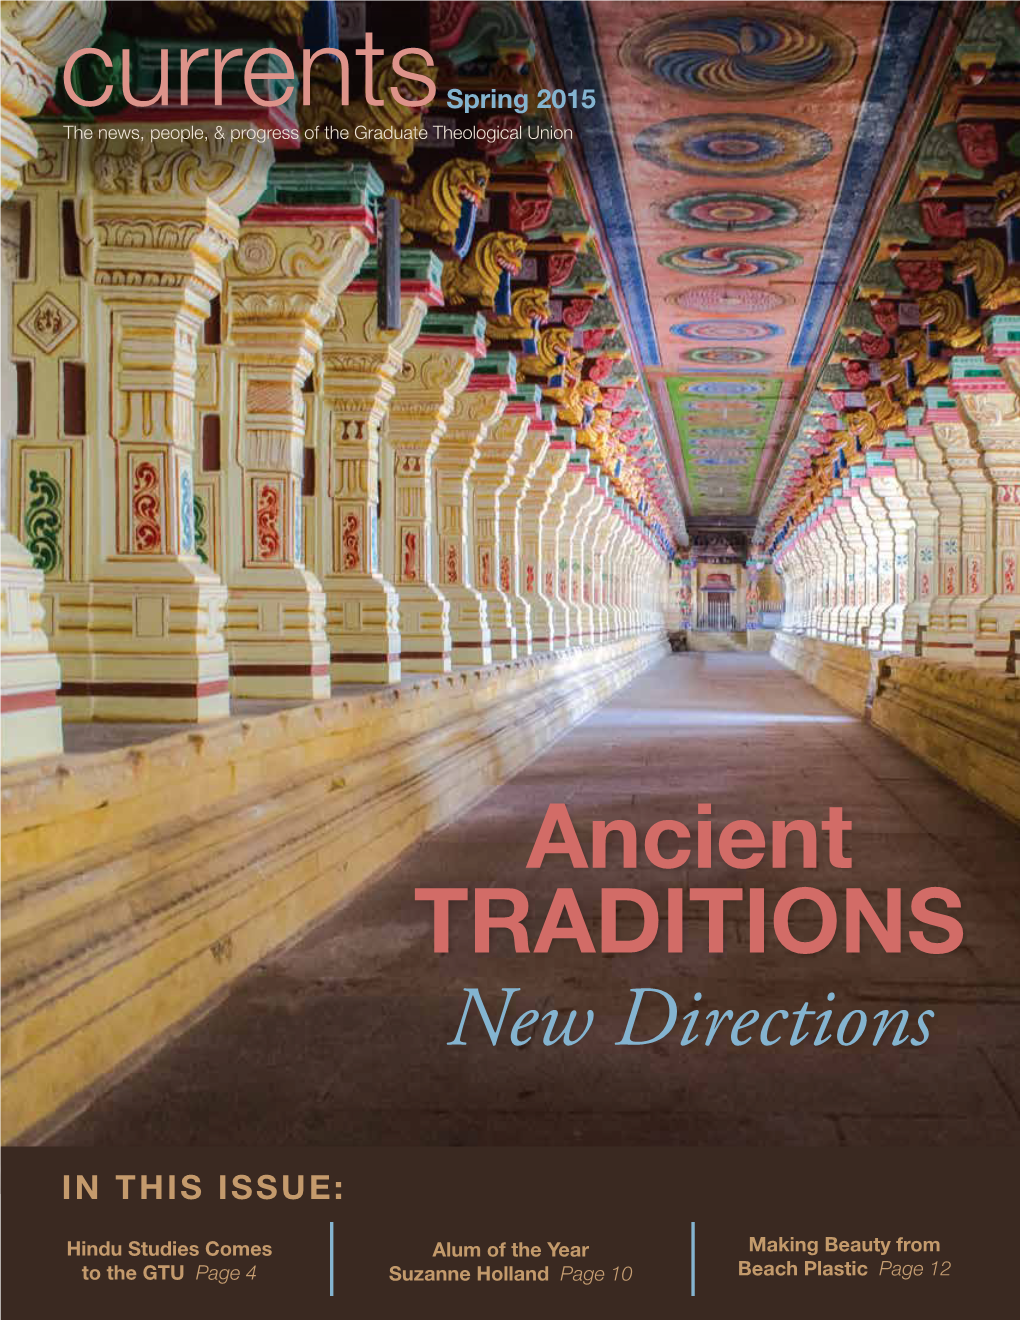 Ancient TRADITIONS New Directions